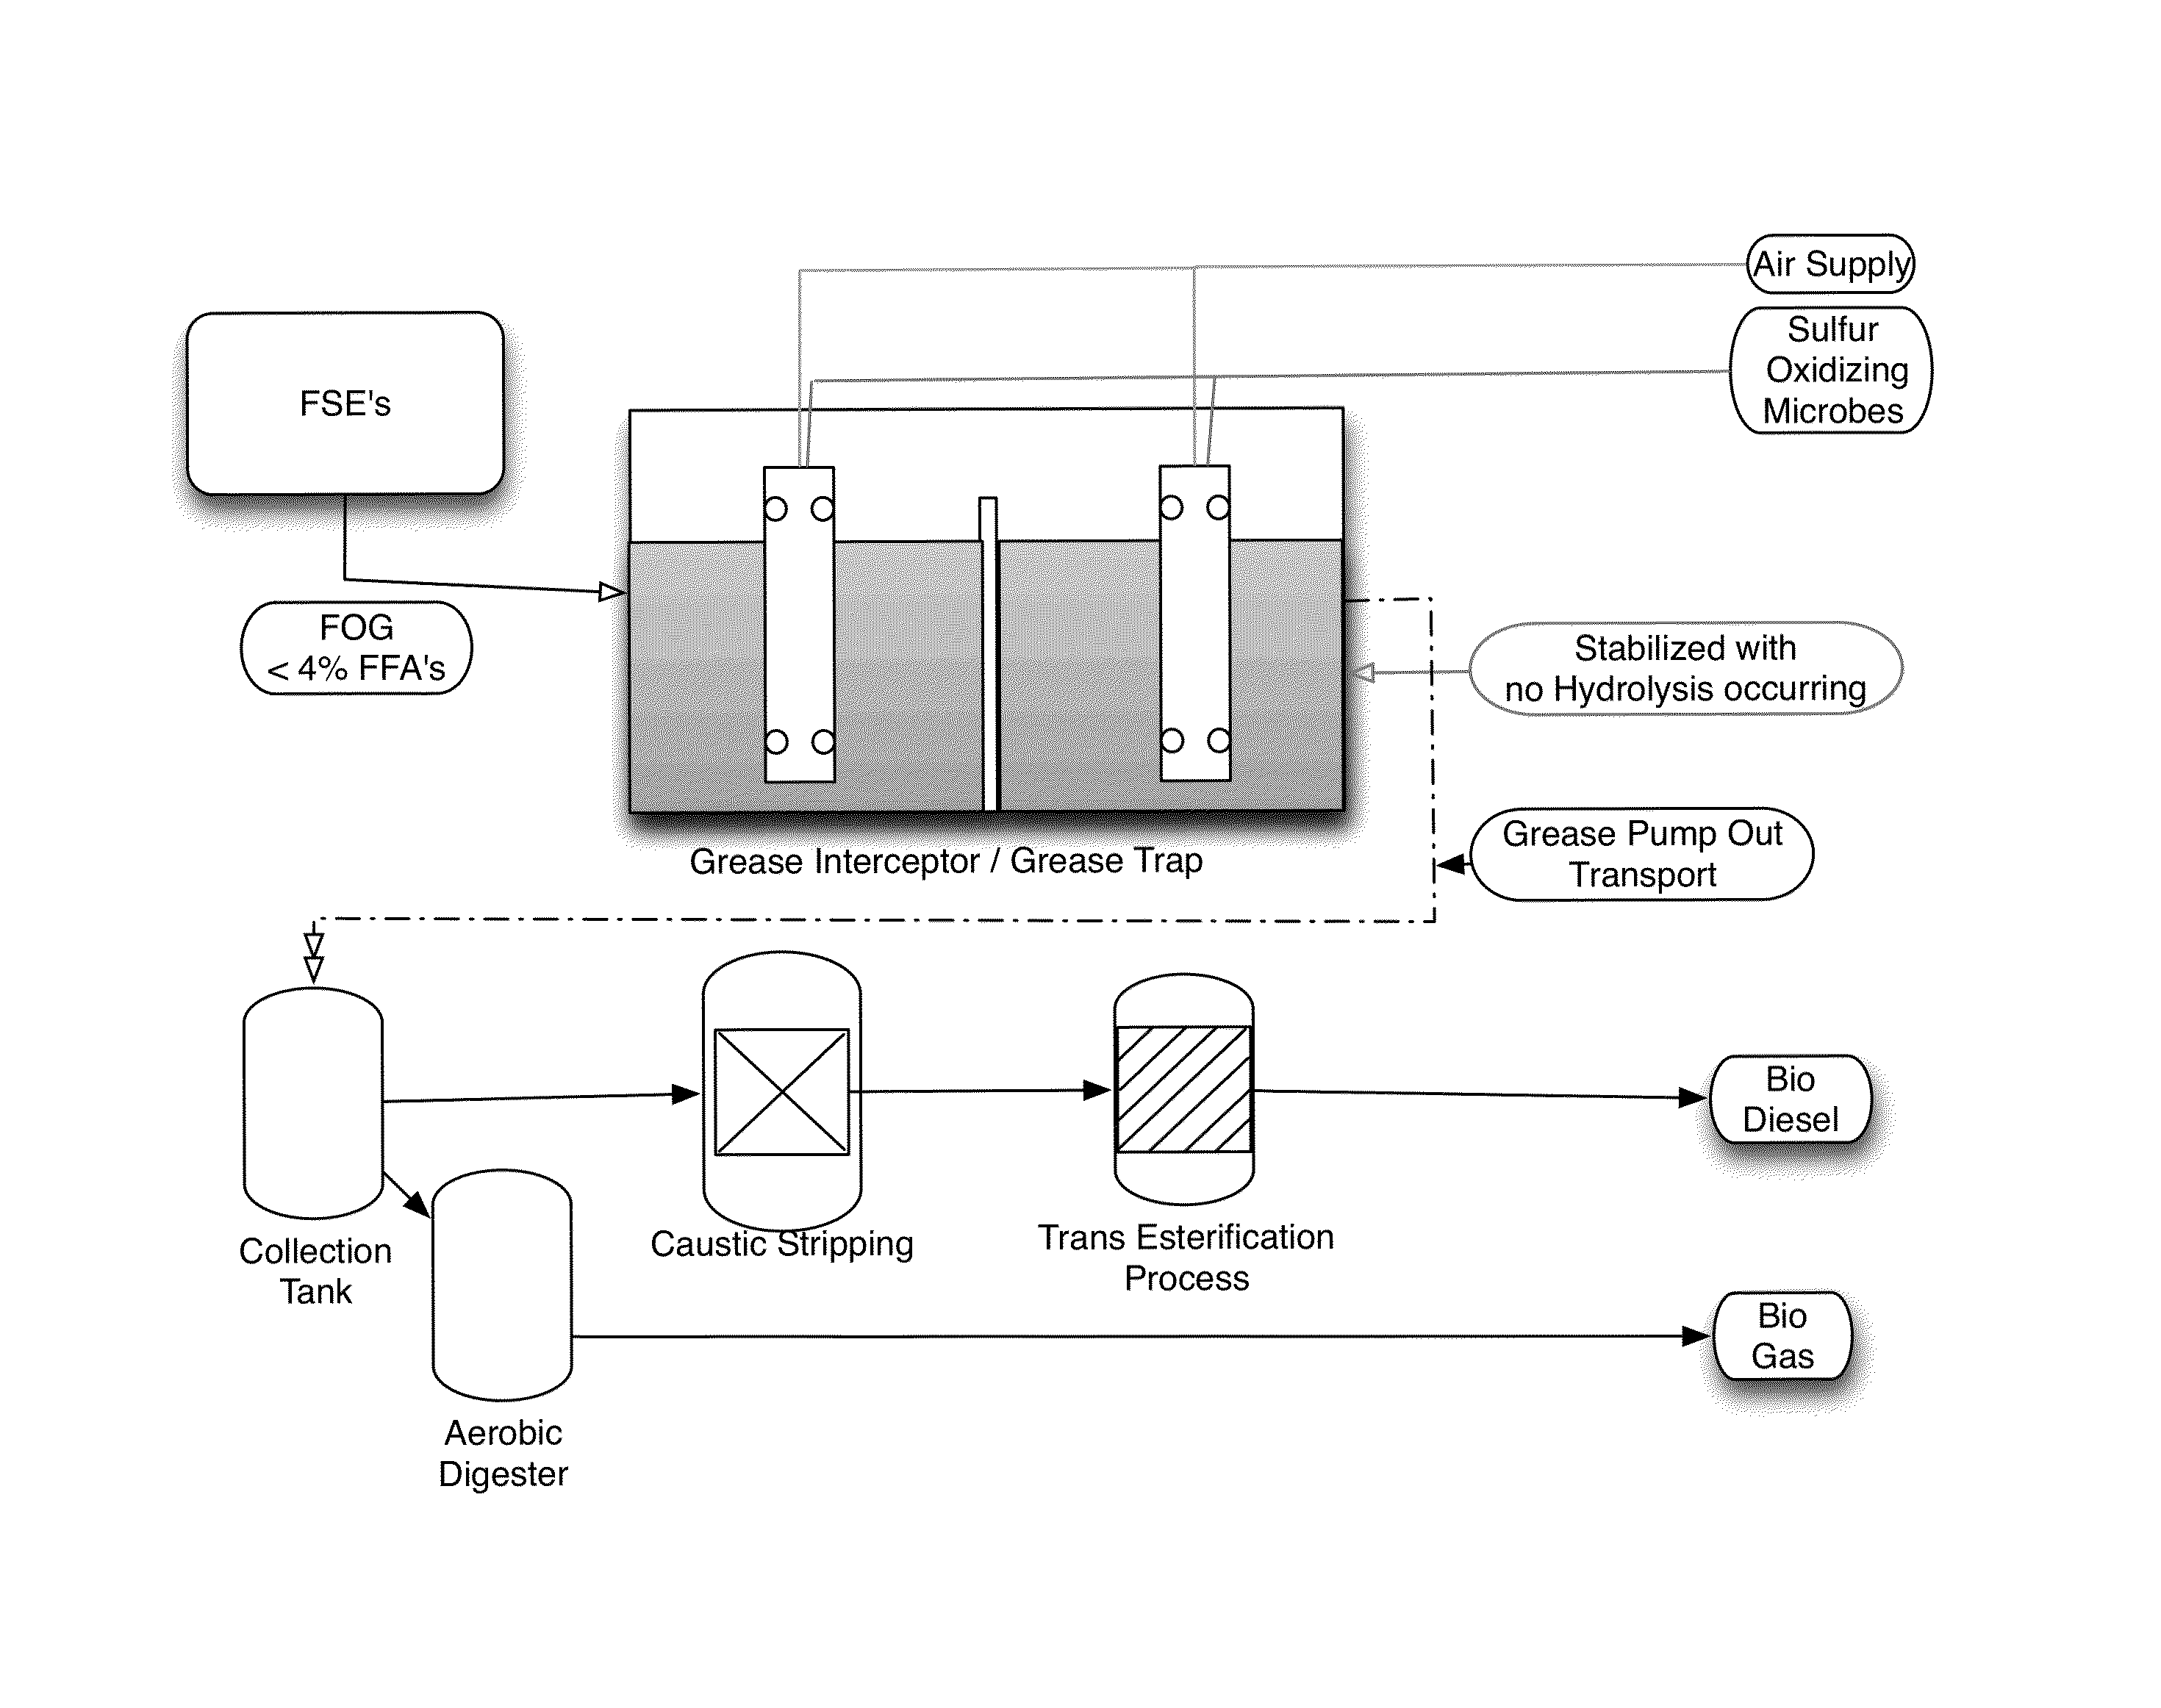 Method of continuous in-situ triglyceride stabilization and sulfur reduction of FOG (fats, oil and grease) to optimize fuel extraction